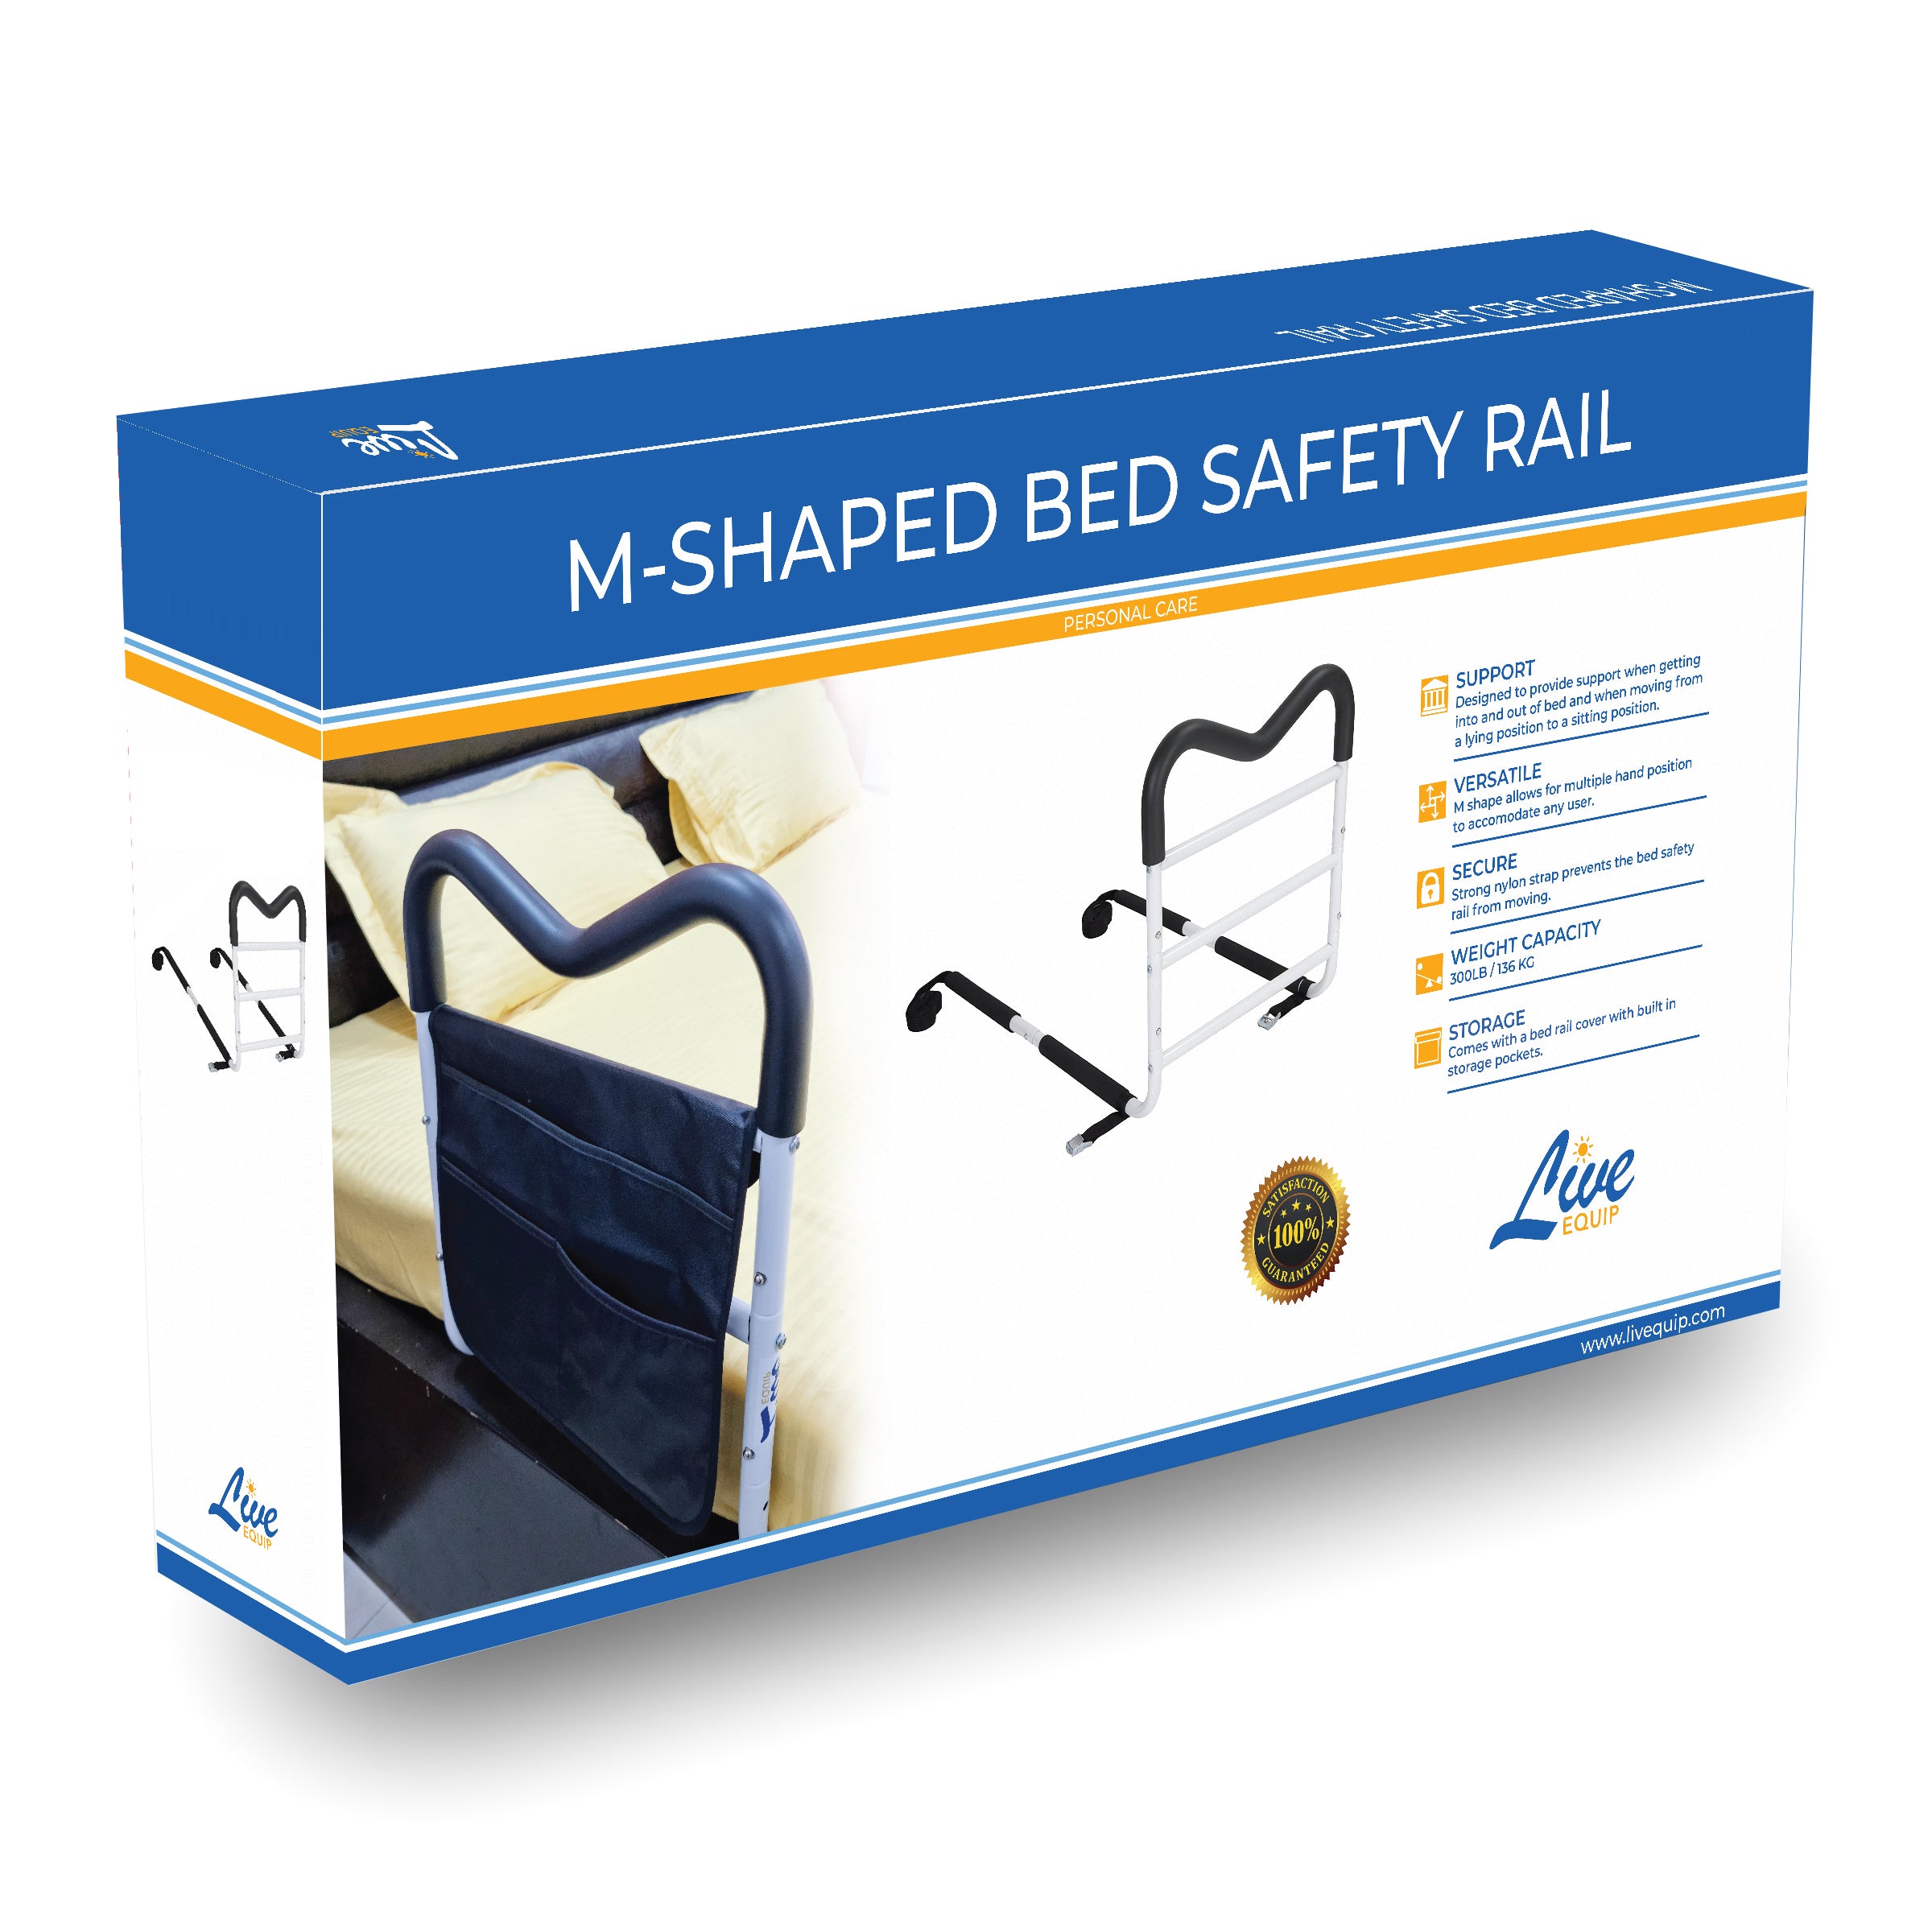 M-Shaped Bed Safety Rail